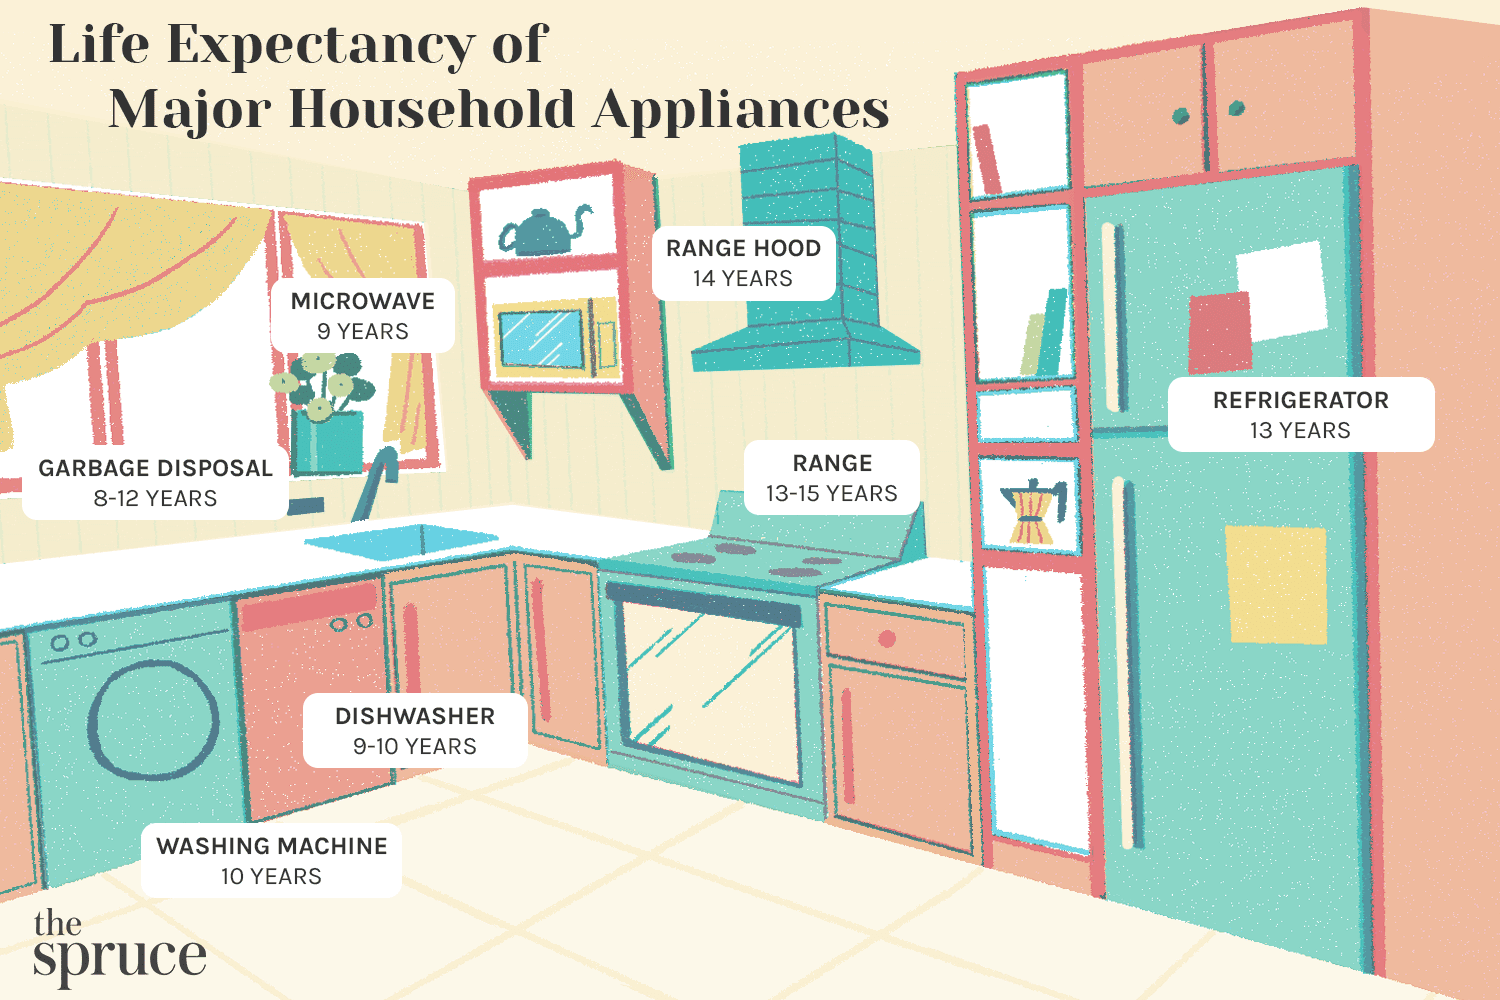 The Life Expectancy of Major Household Appliances